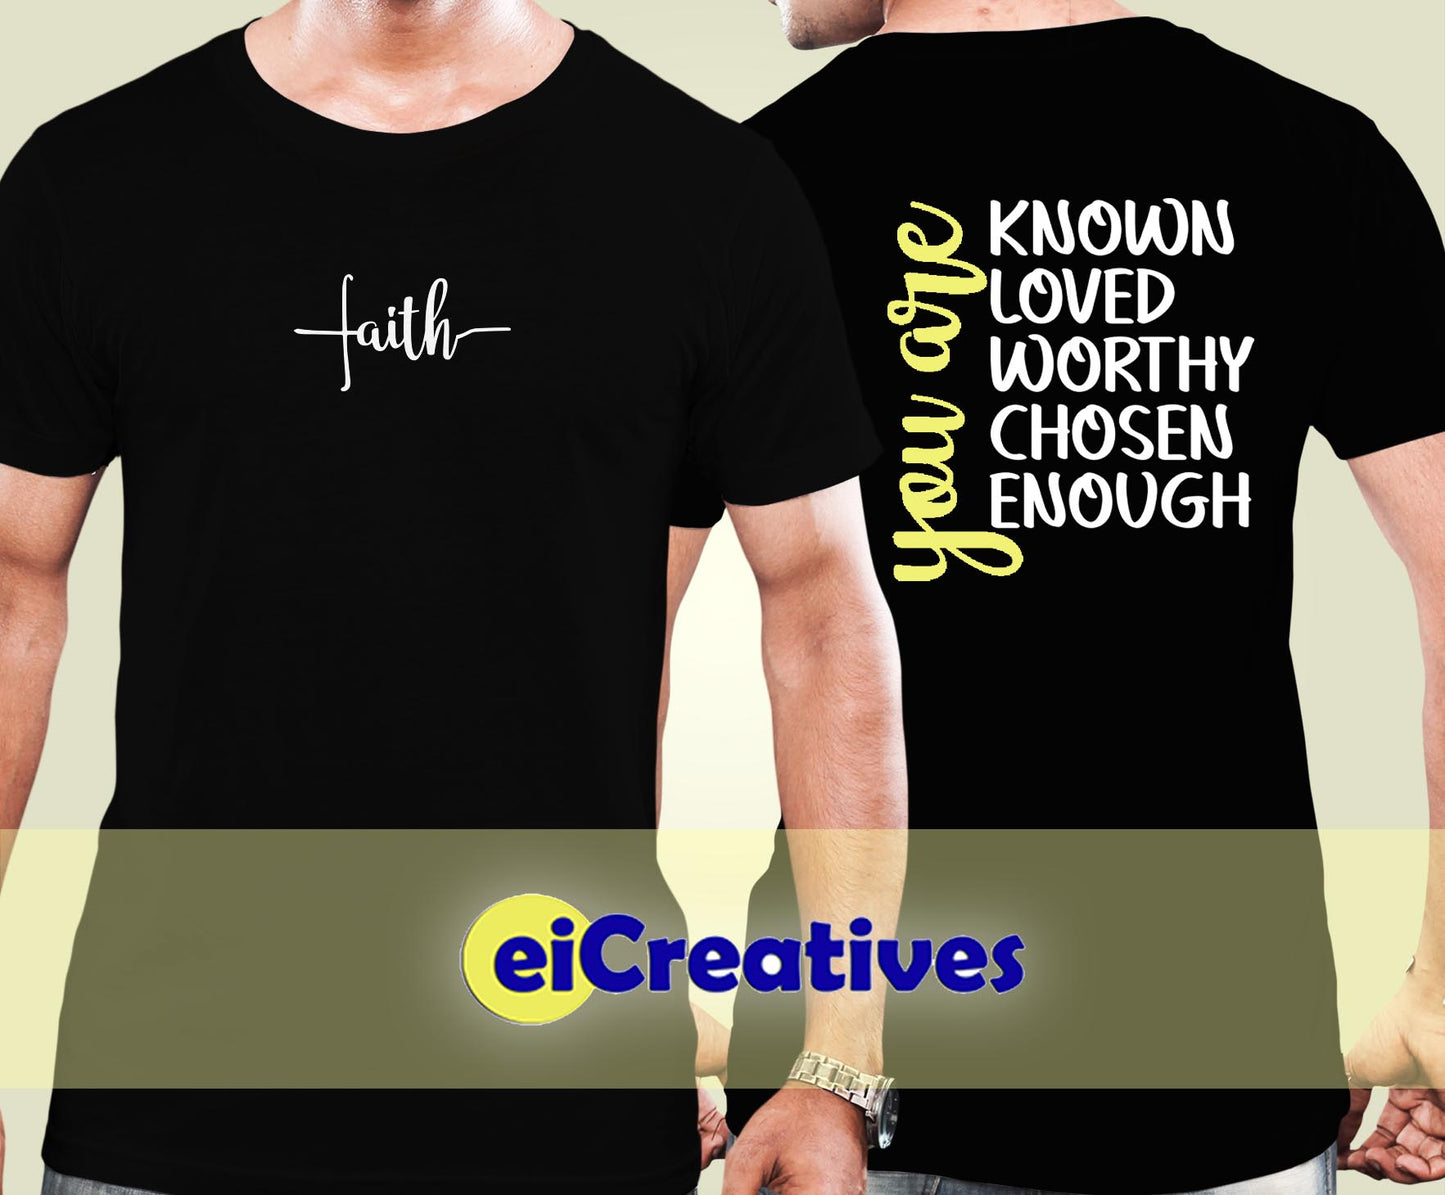 FAITH You are Known Loved Worthy - Tshirt